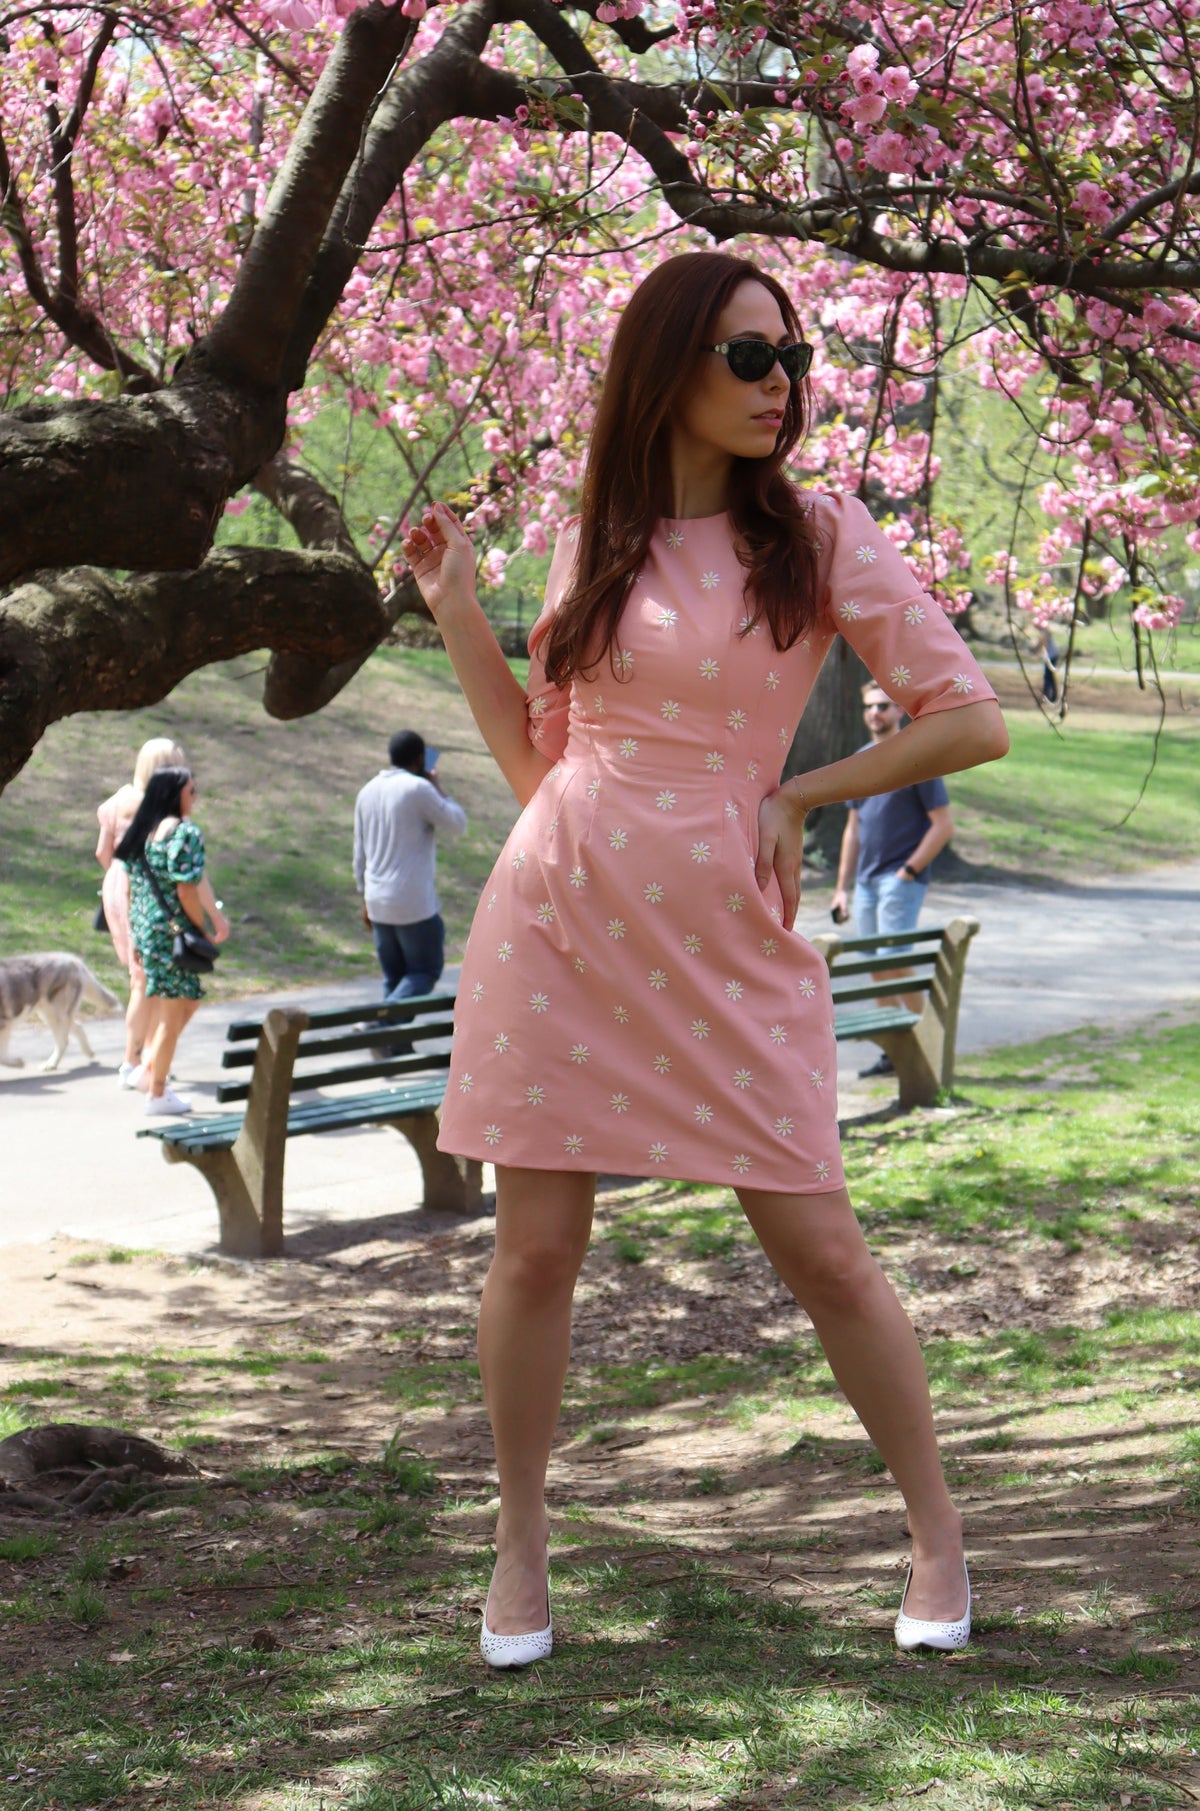 Model in peachy pink short dress with white daisy appliques looking to the side in front of a cherry tree.